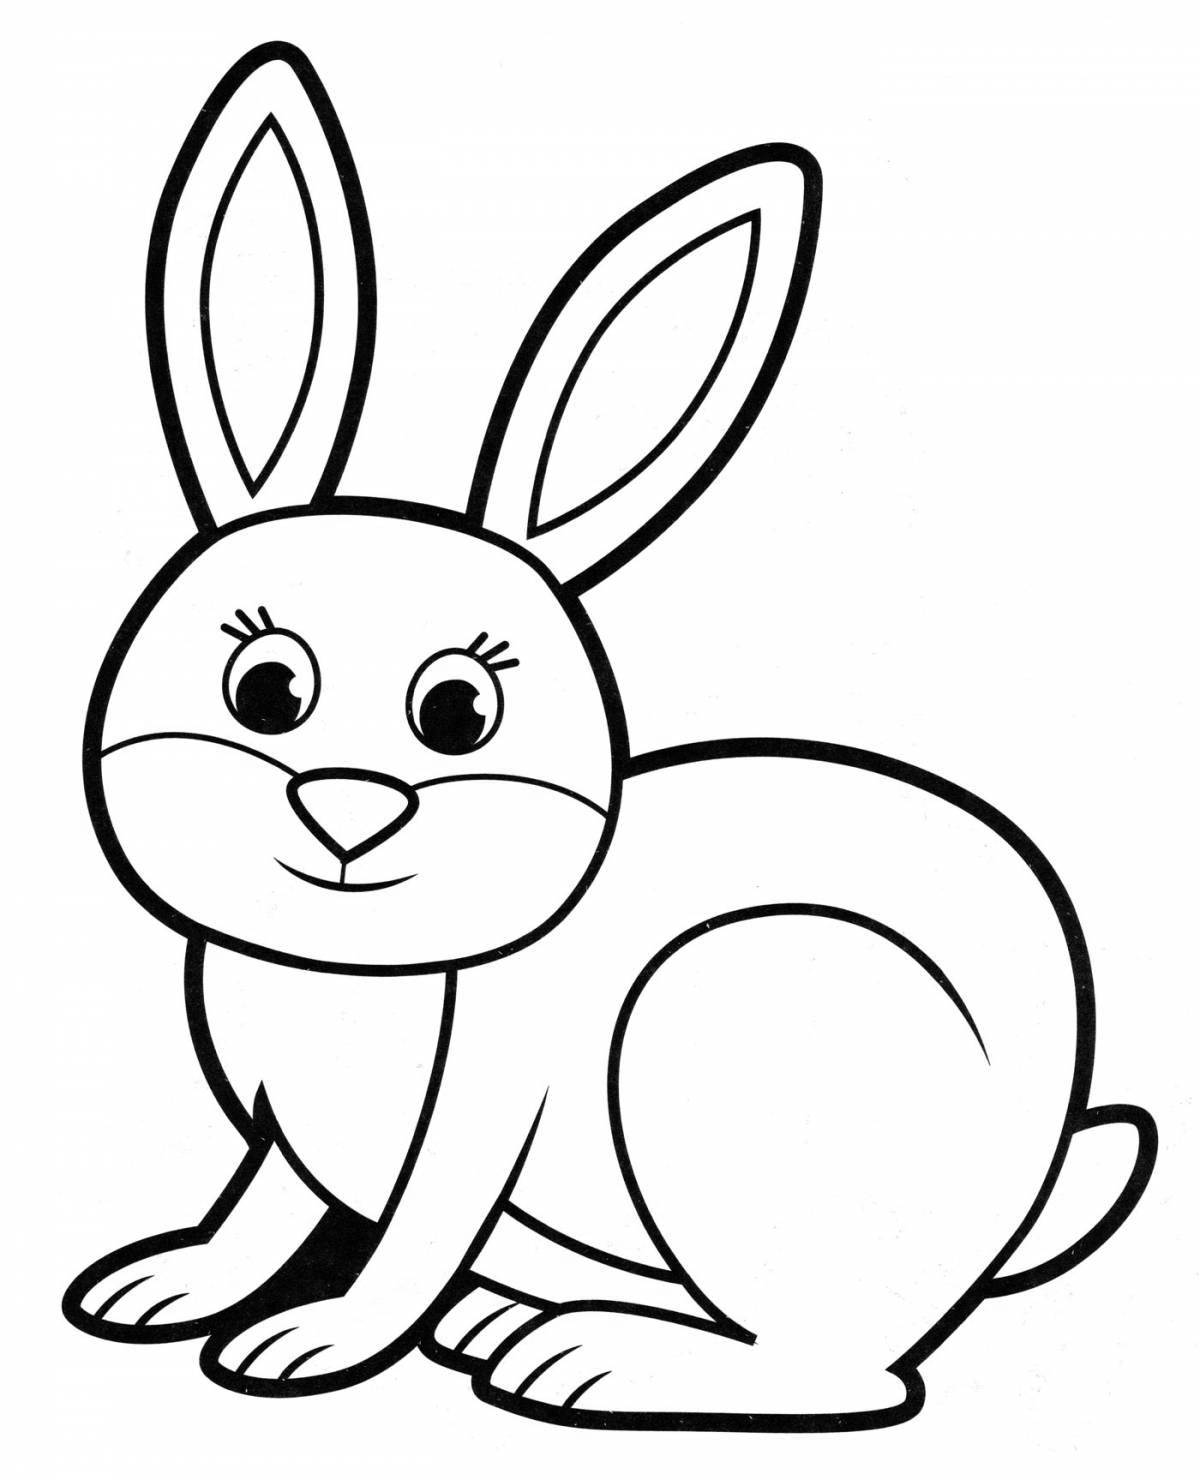 Fluffy coloring page bunny drawing